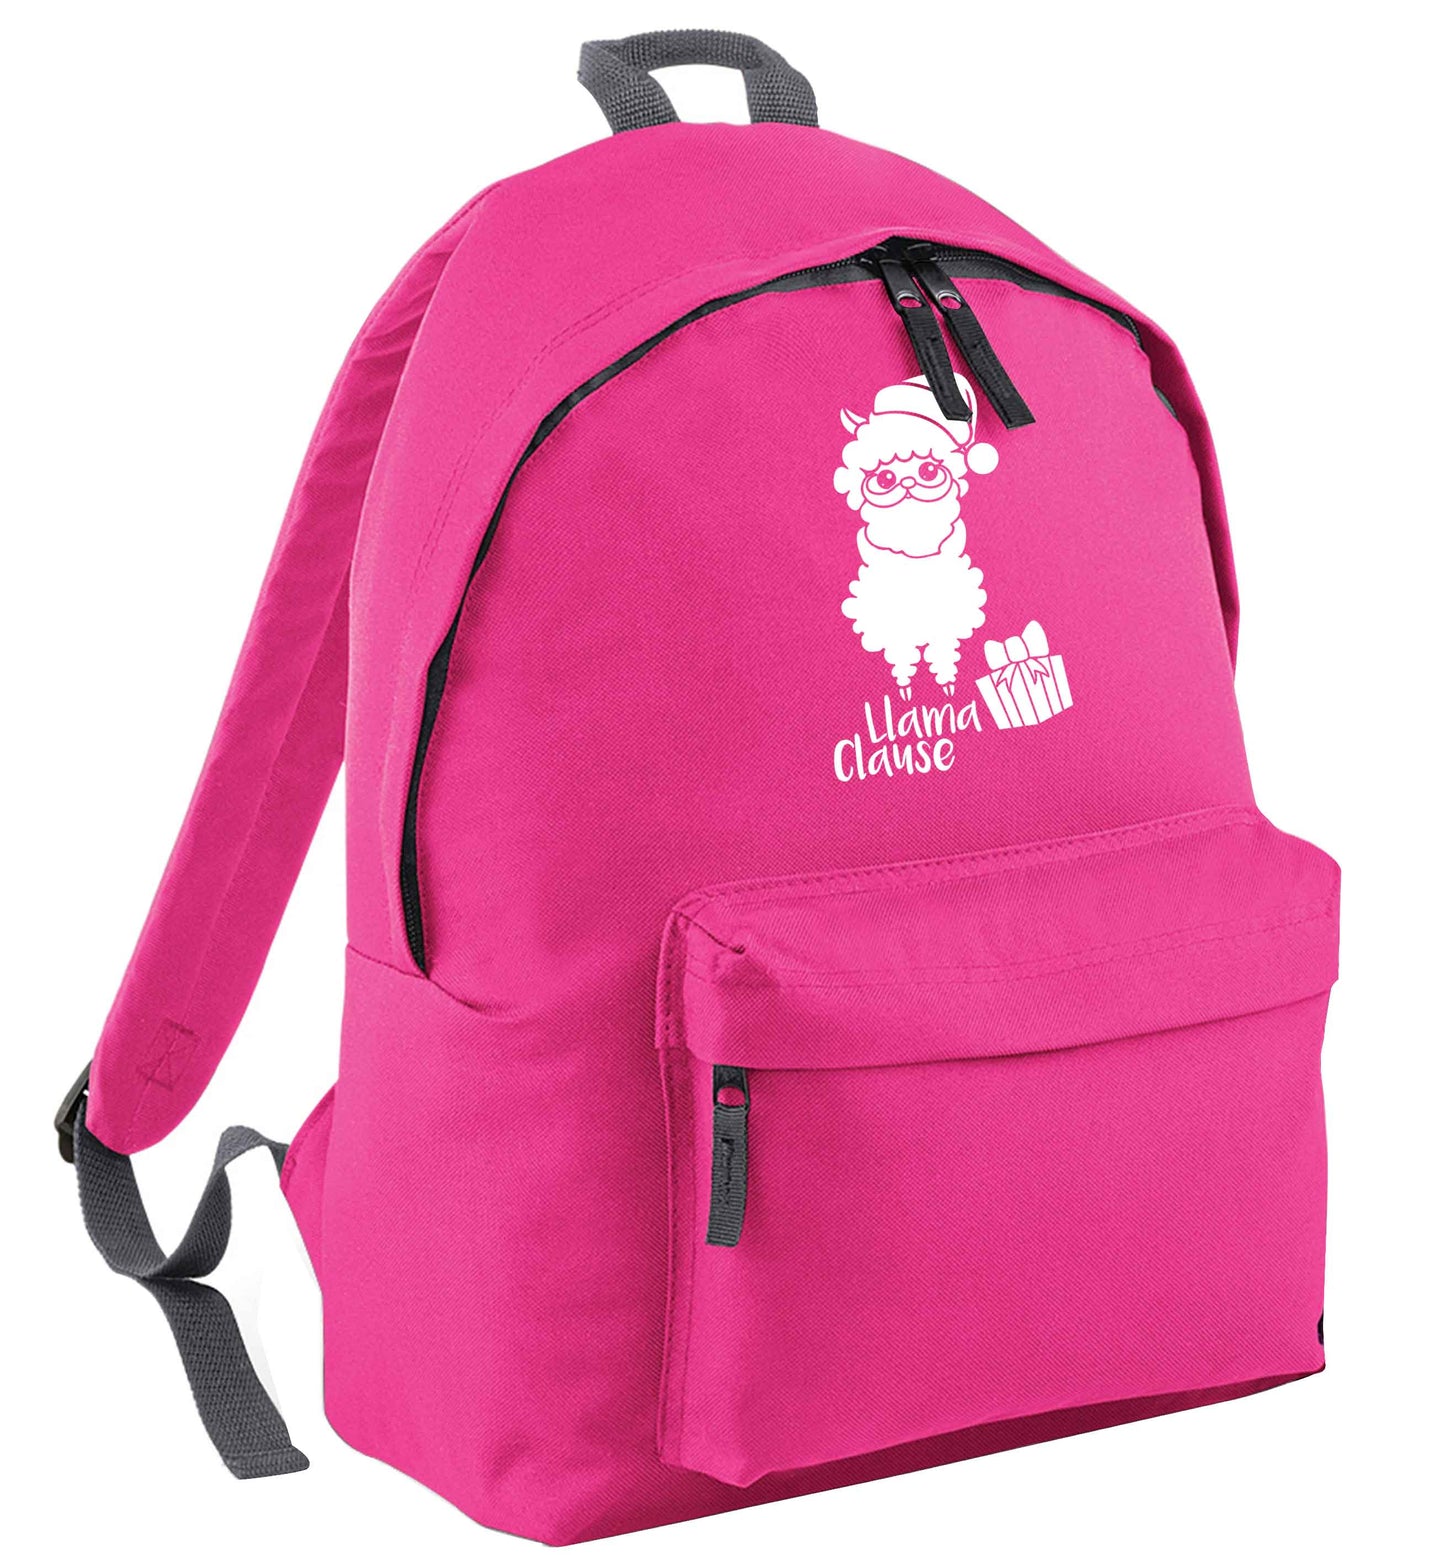 Llama Clause pink adults backpack